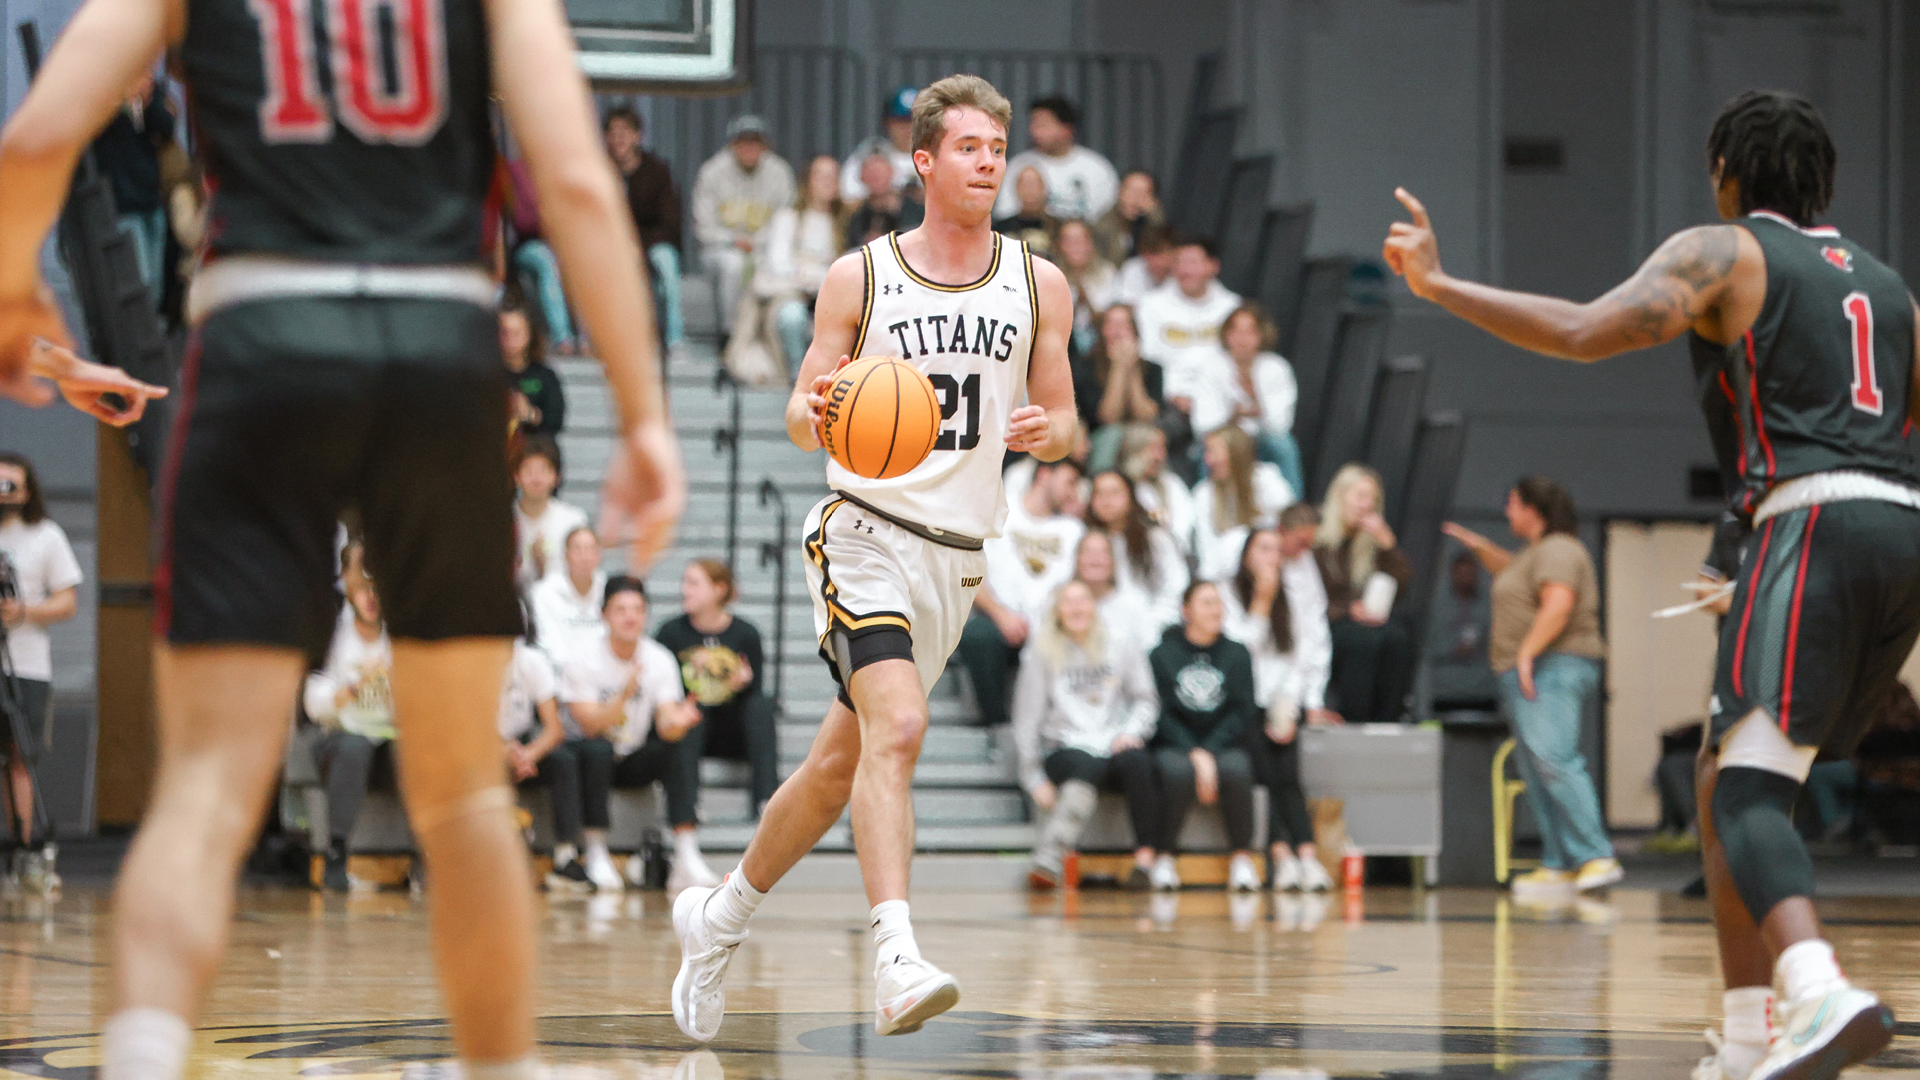 Carter Thomas went four-of-five from behind the arc in the Titans' loss to Redlands on Saturday